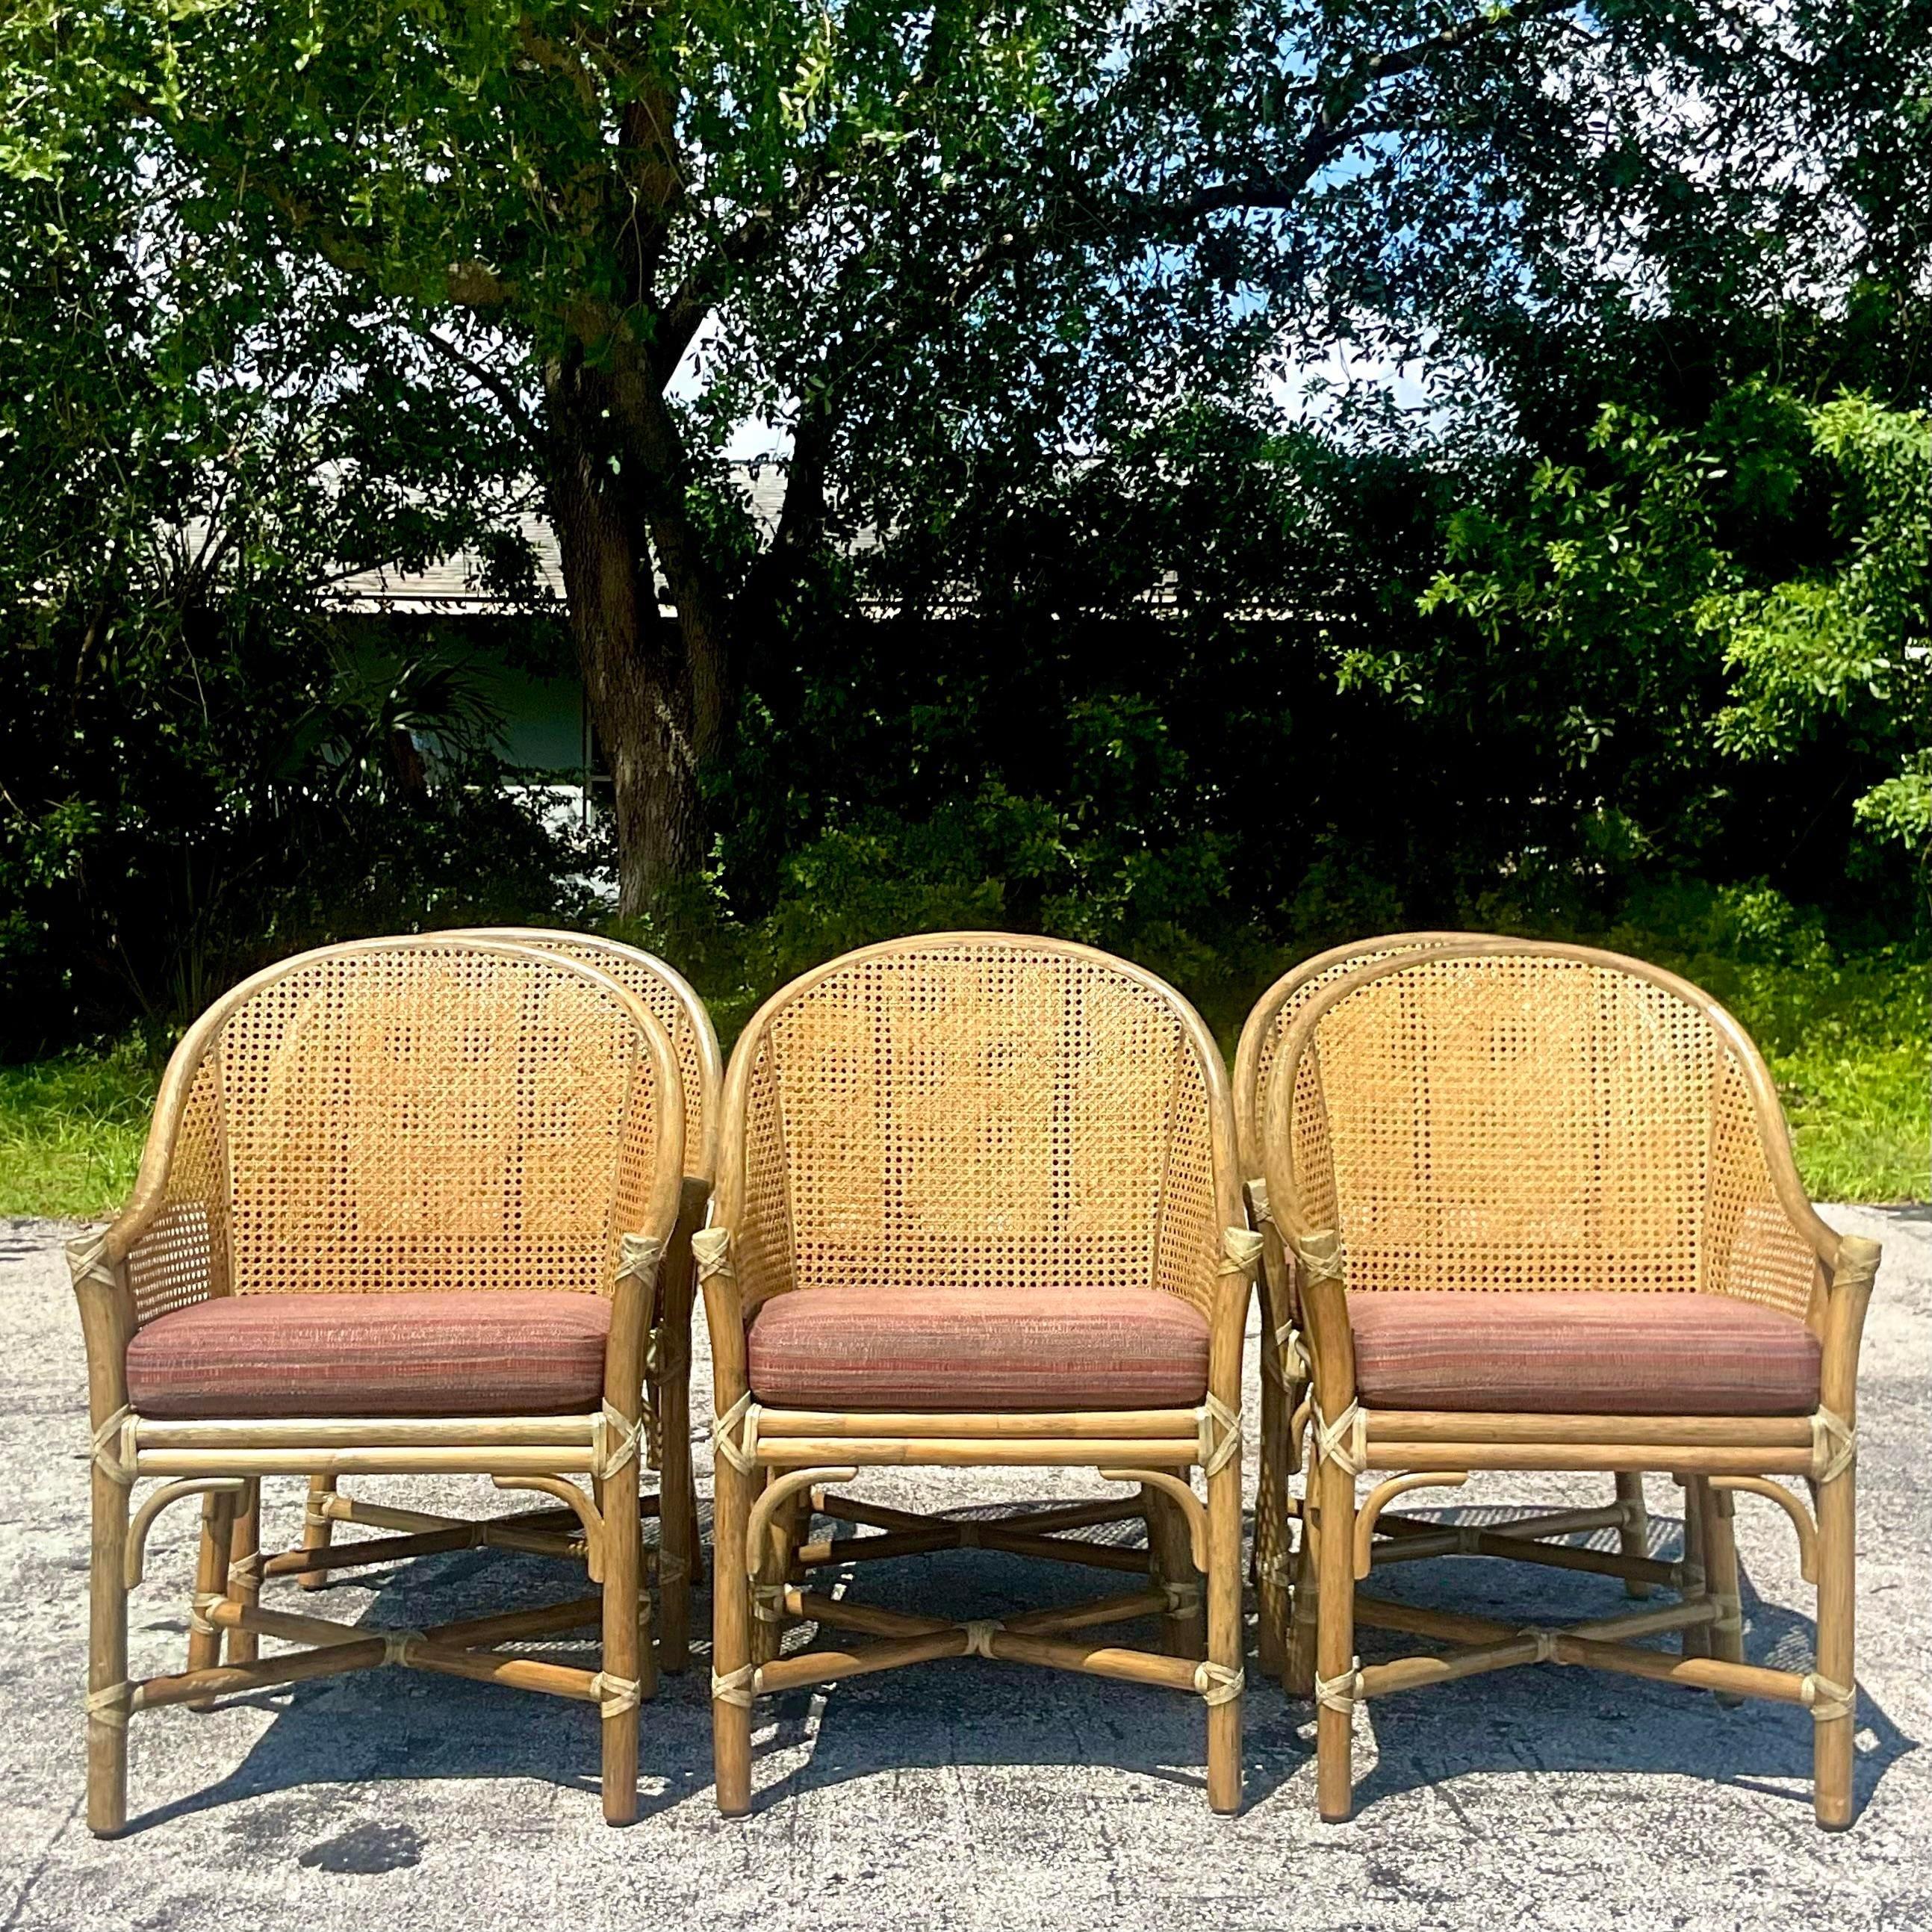 A fabulous set of vintage Coastal dining chairs. Made by the iconic McGuire group and tagged on the bottom. Chic bent rattan in a sloped arm design. Cane back seats sun perfect shape. Loose cushions in a tweed boucle. Acquired from a Palm Beach